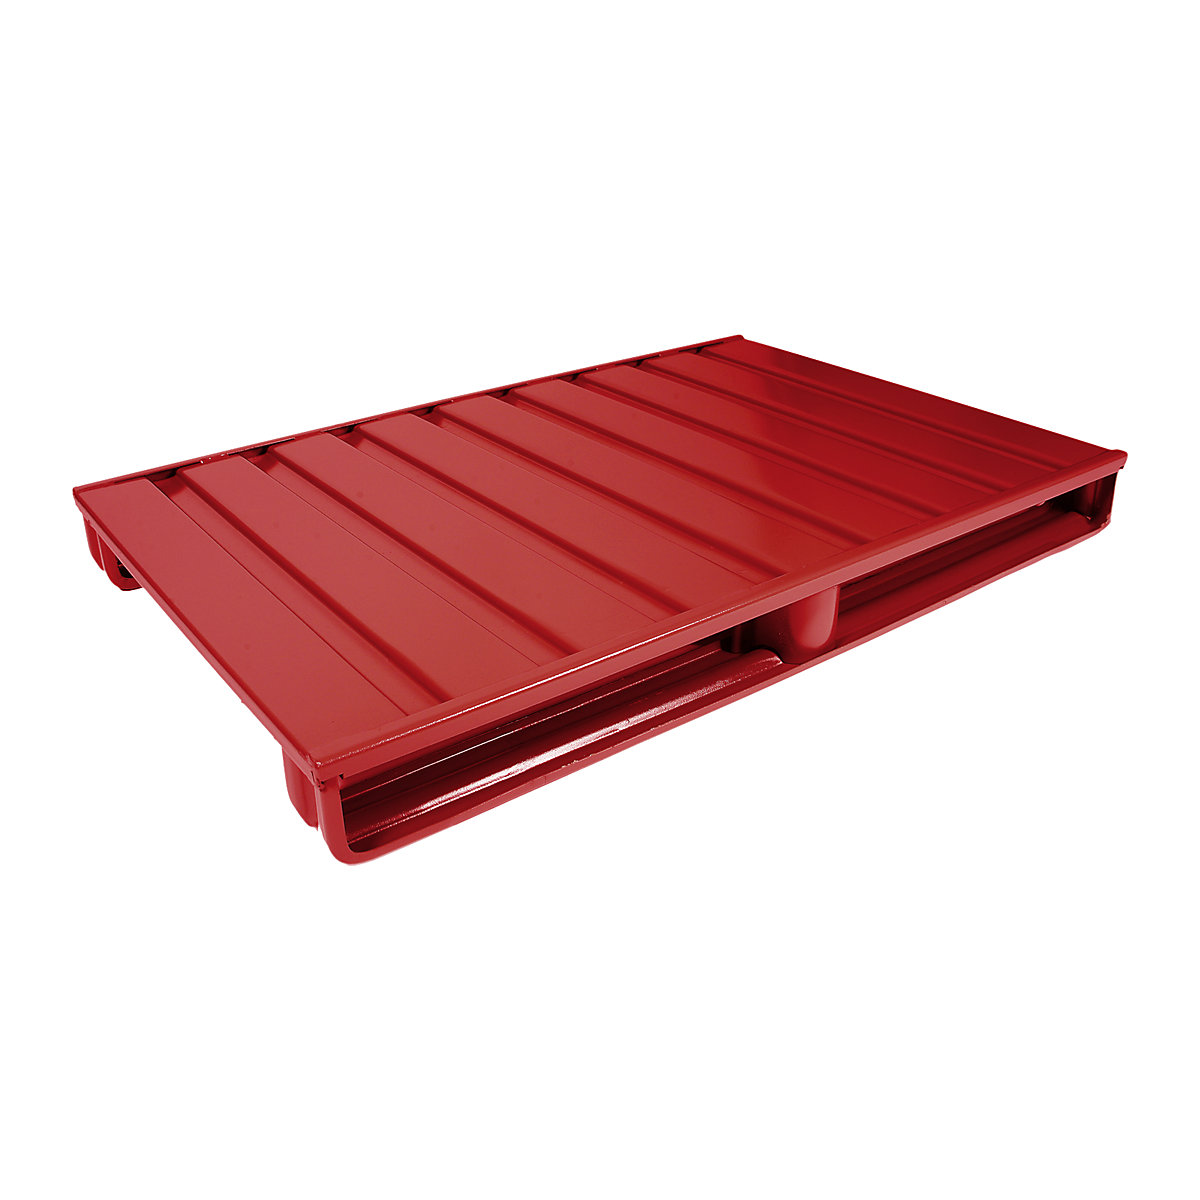 Flat steel pallet – Heson, LxW 1200 x 1000 mm, max. load 1500 kg, flame red-2